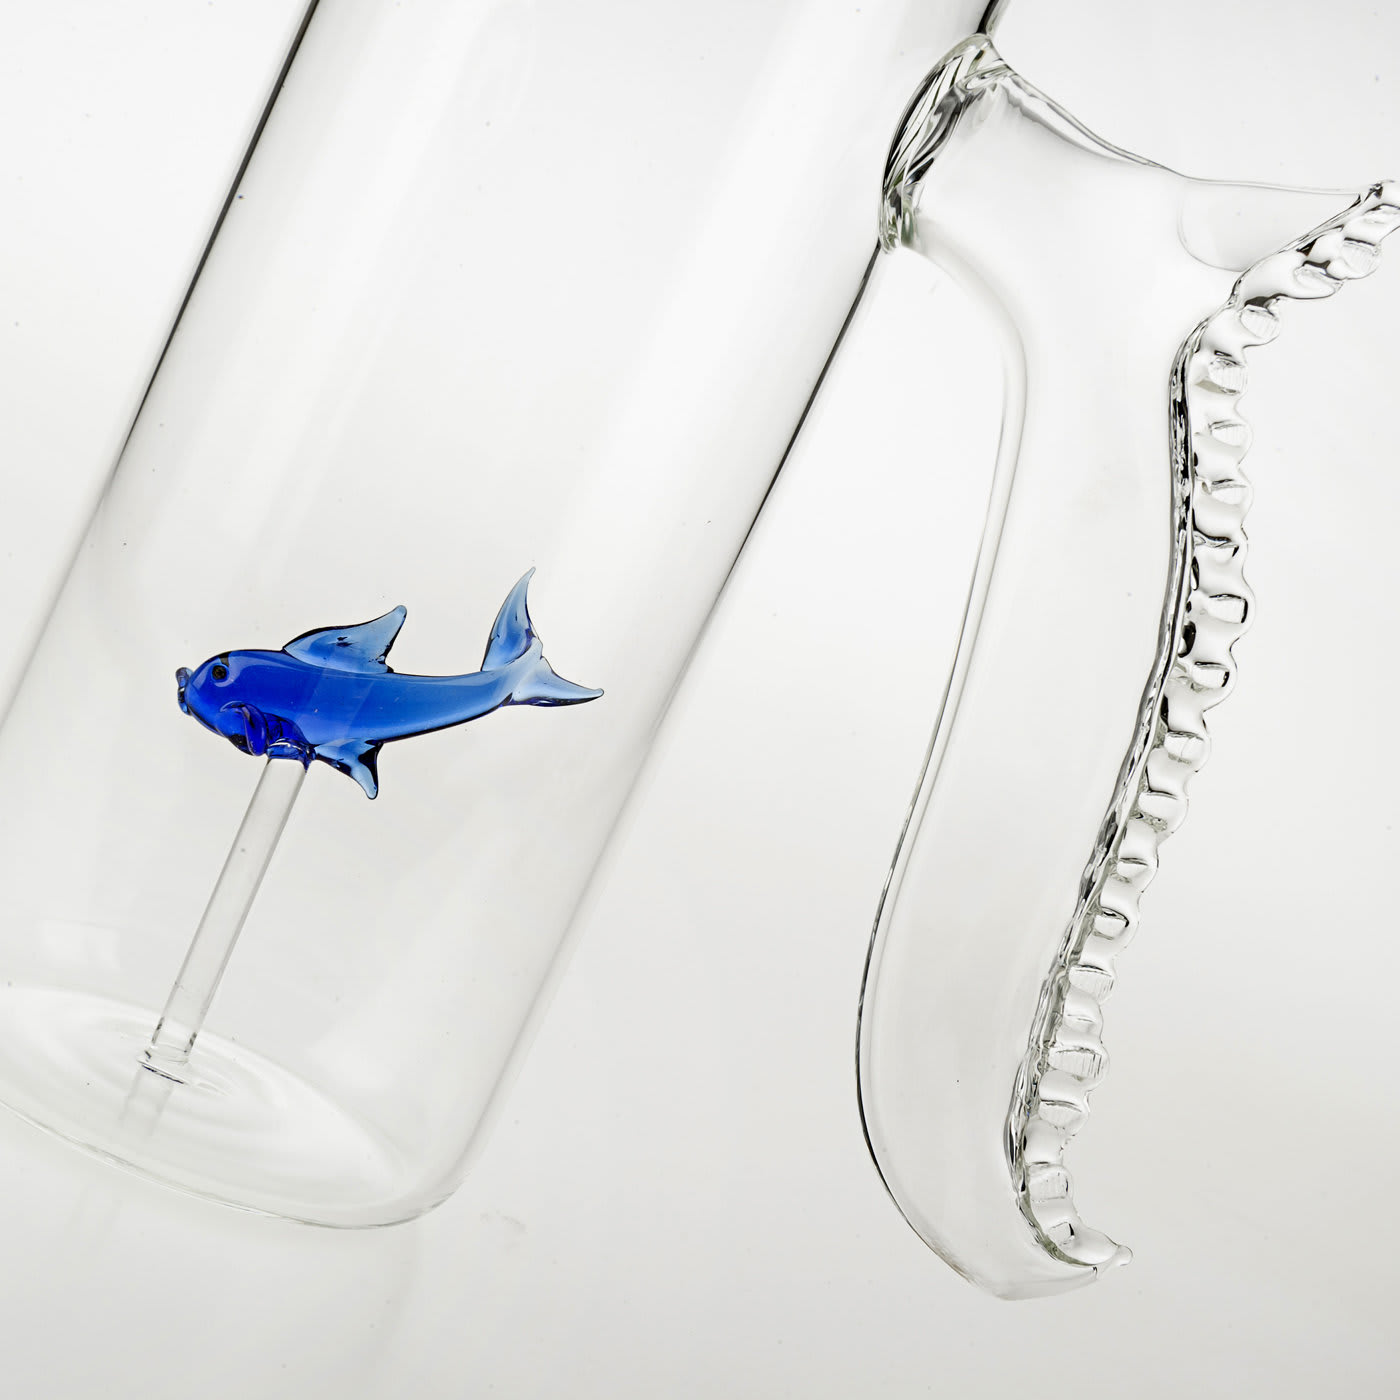 Set of Little Blue Fish Pitcher and Four Little Blue Fish Glasses - Casarialto